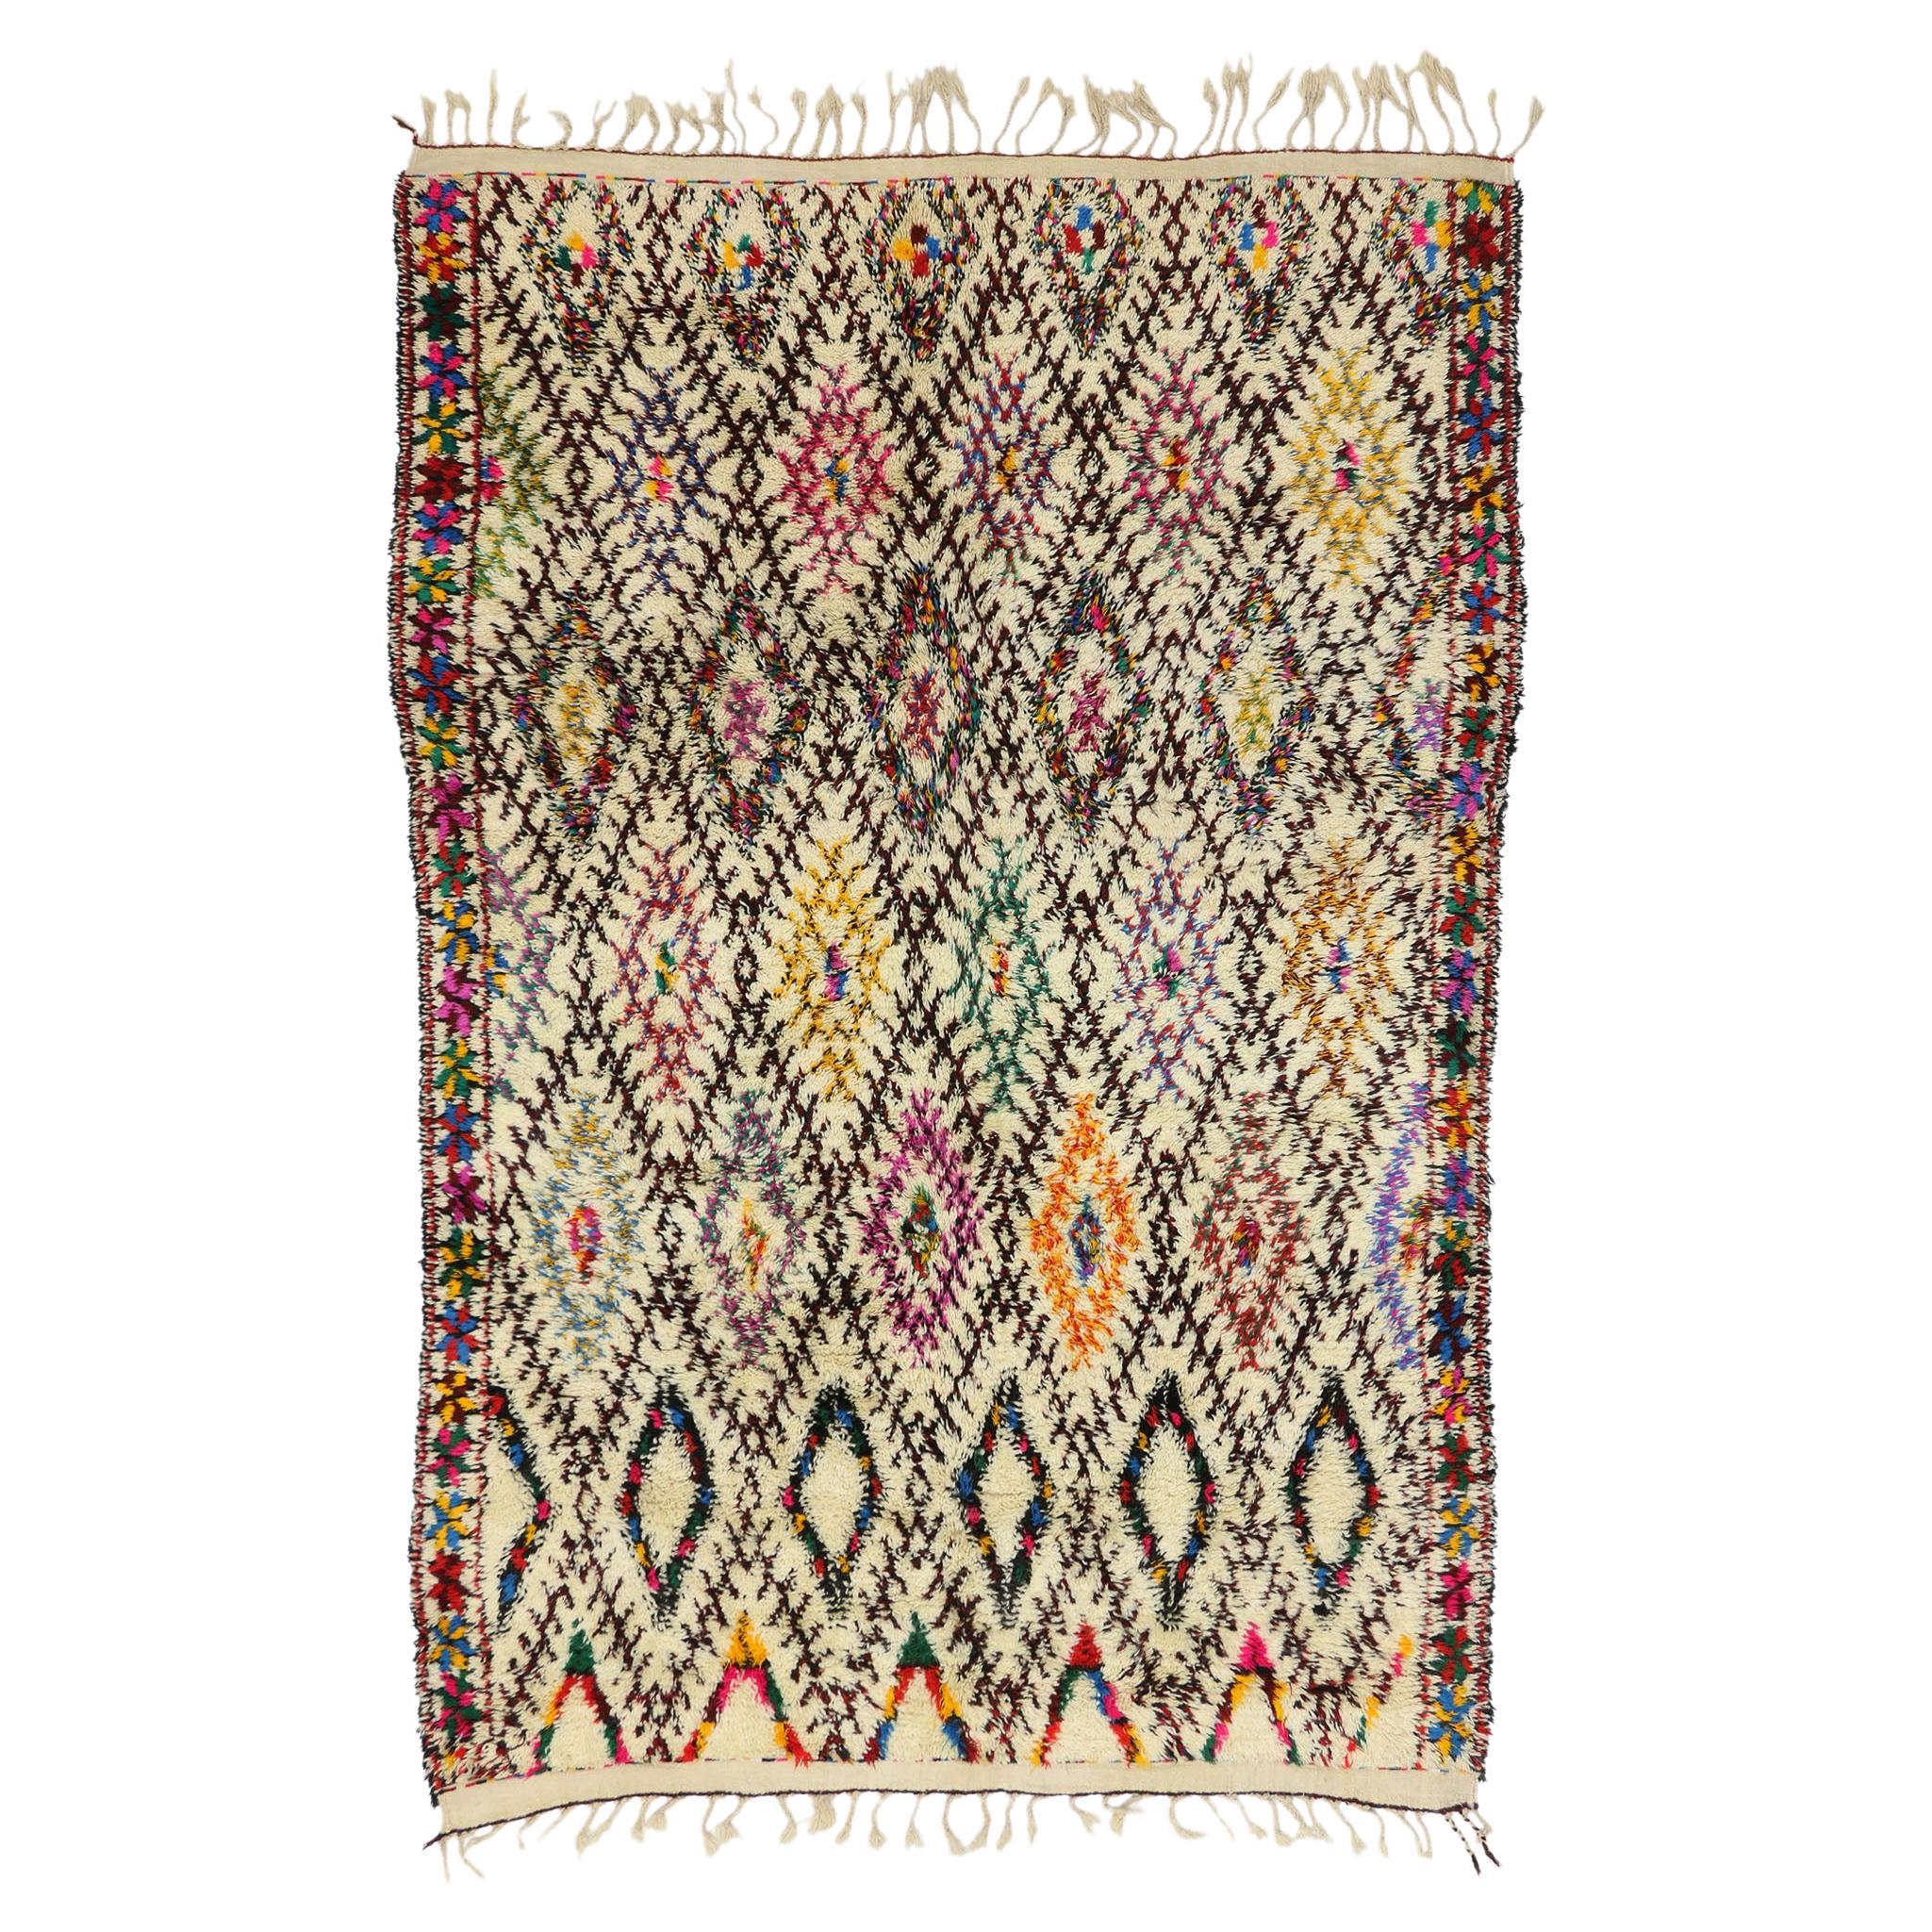 Vintage Moroccan Beni Ourain Rug, Colorfully Curated Meets Boho Chic